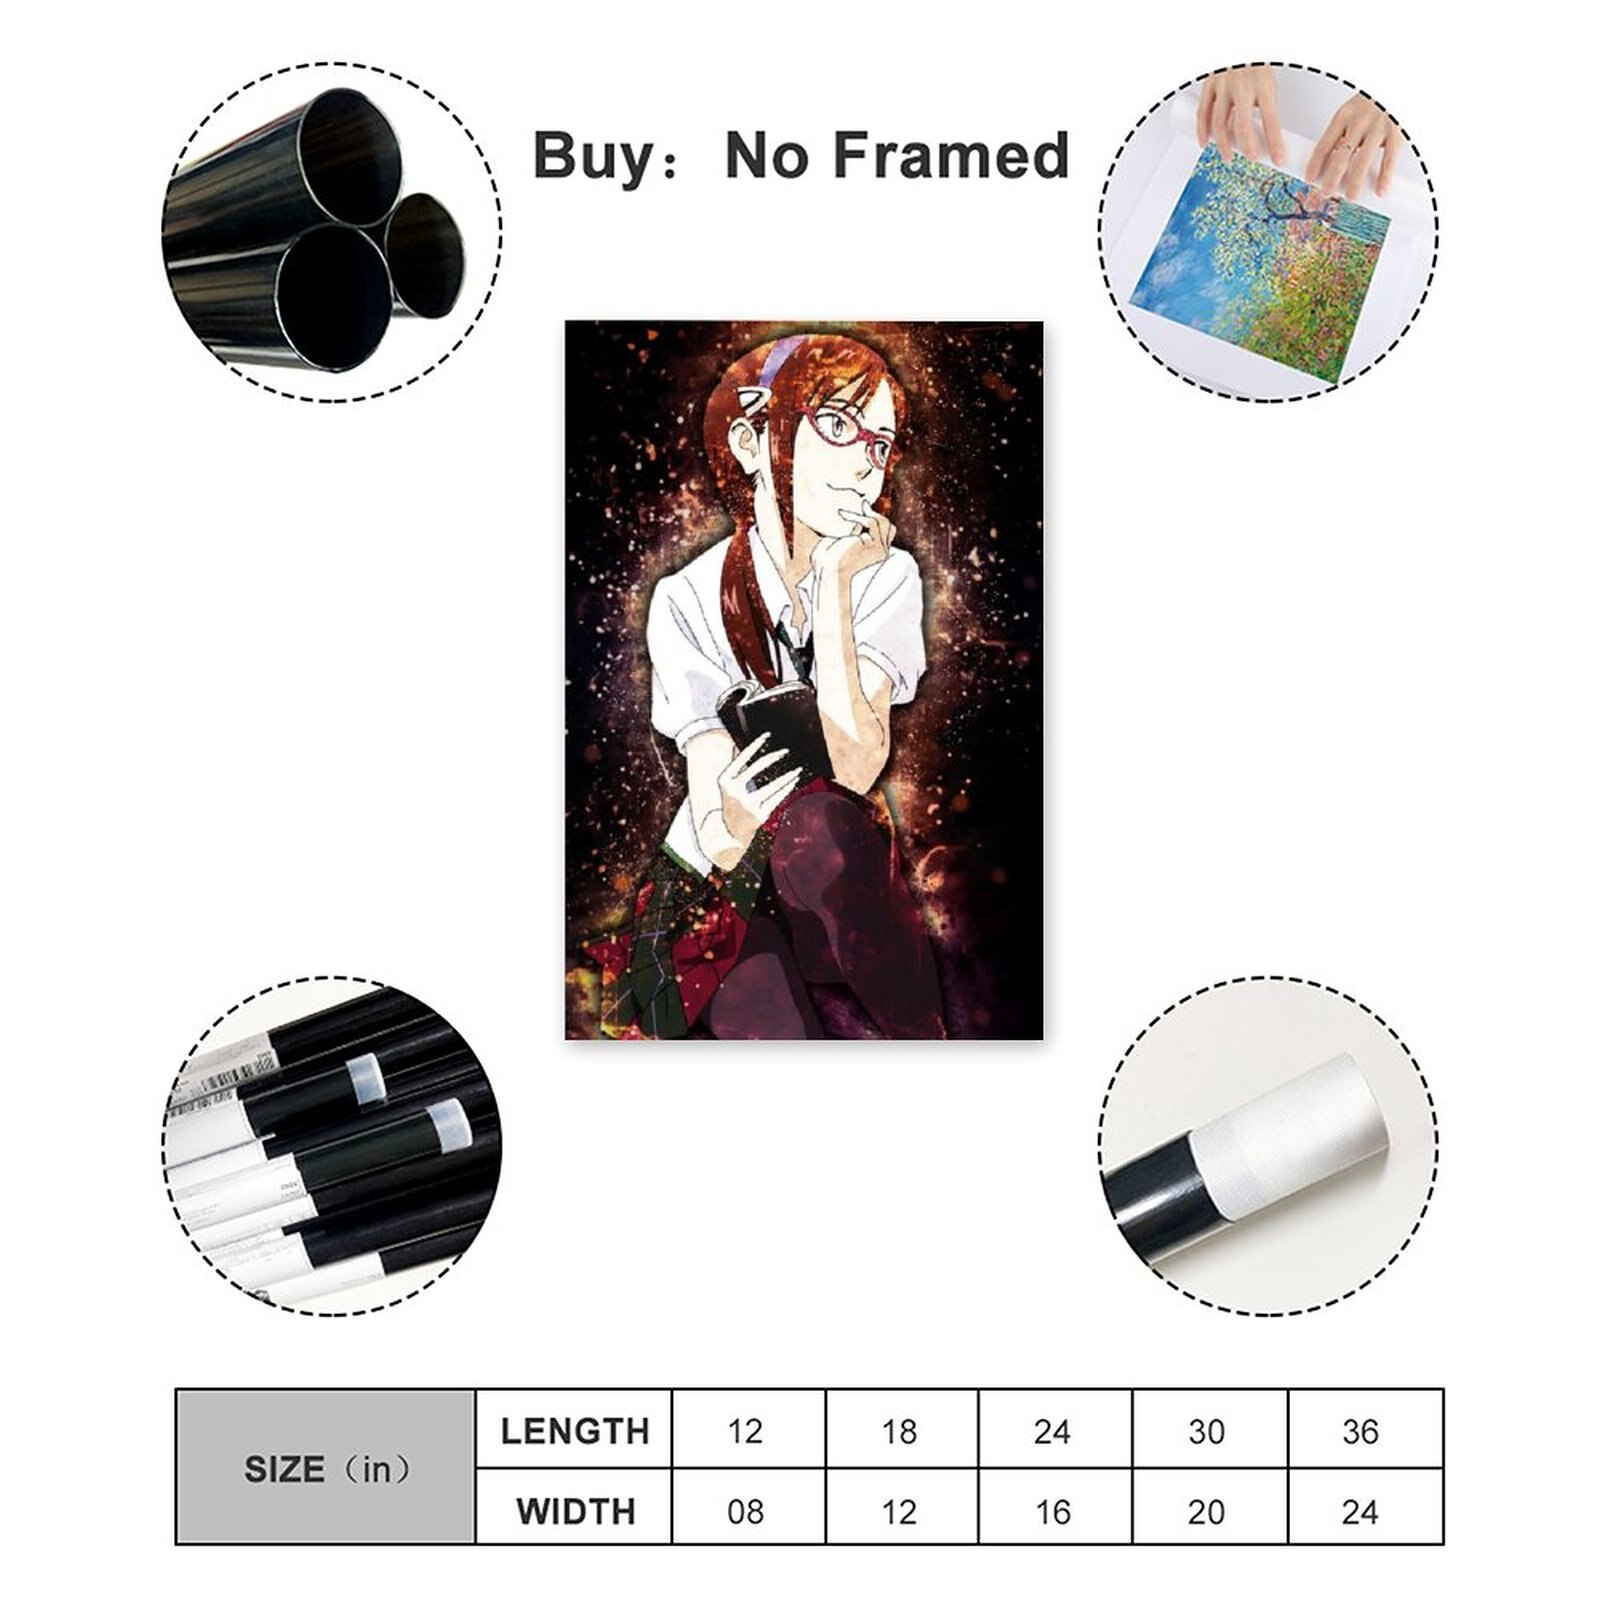 Anime Evangelion Makinami GirlCanvas Painting Wall Art Posters and Prints Wall Pictures for Living Room Decoration 1 - Evangelion Shop